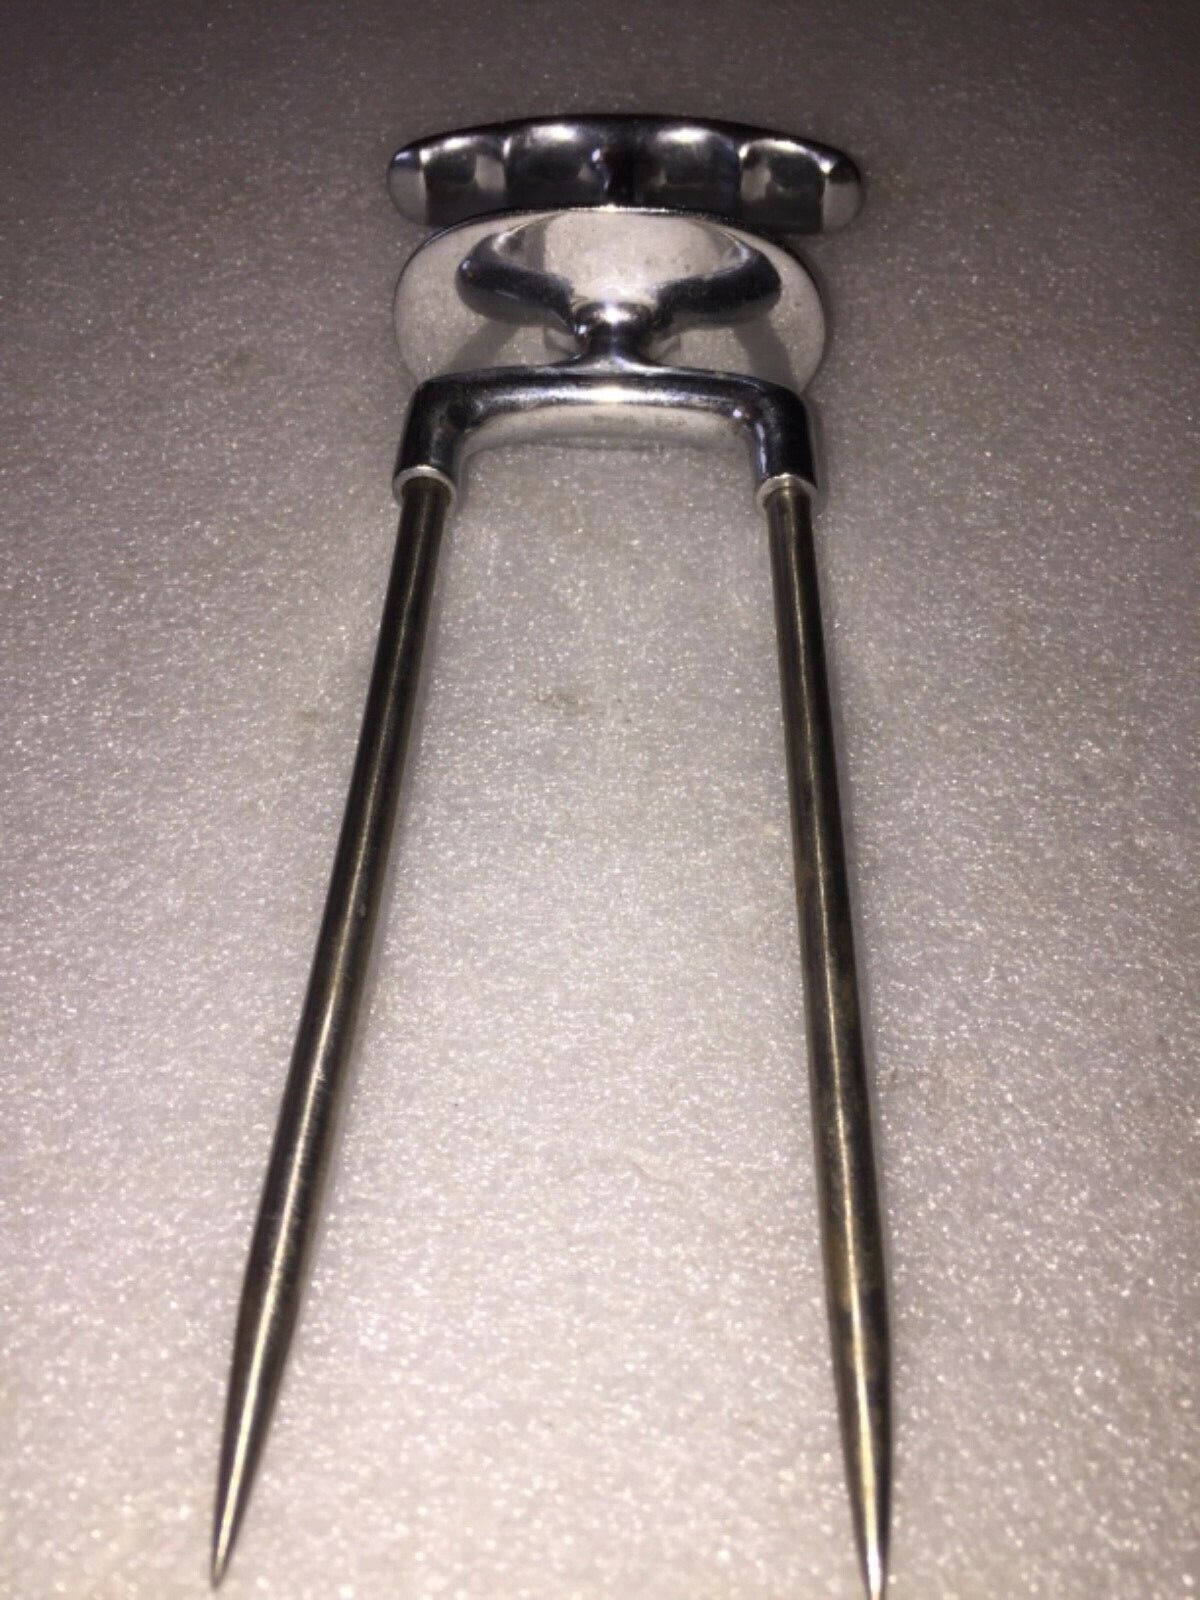 Vintage Fred Roberts Meat Roast Holder Stainless Steel Prongs for Carving,Japan 